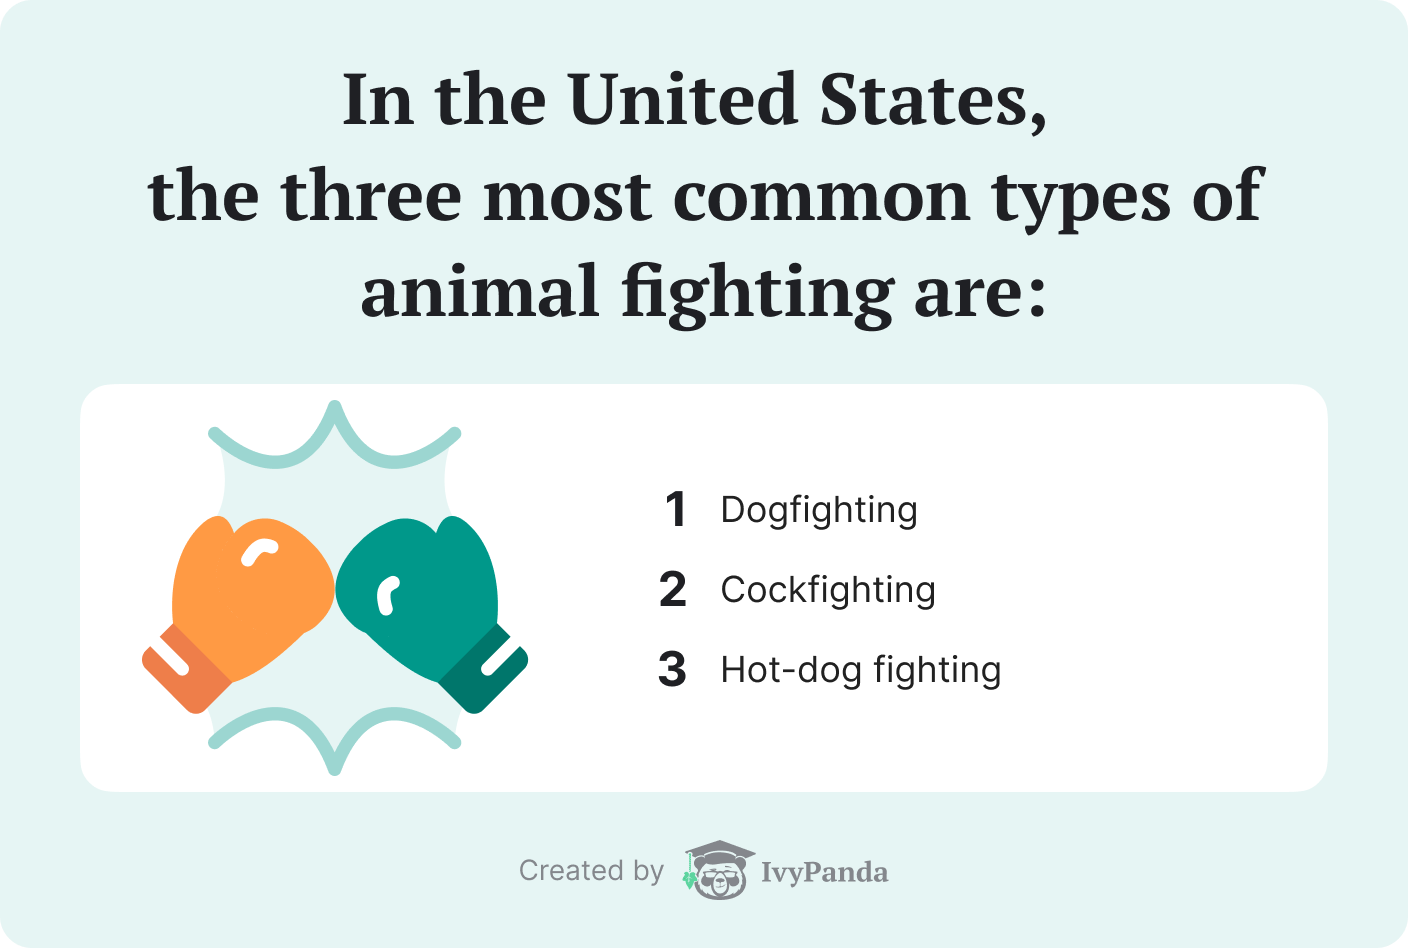 Three most common types of animal fighting in the US.